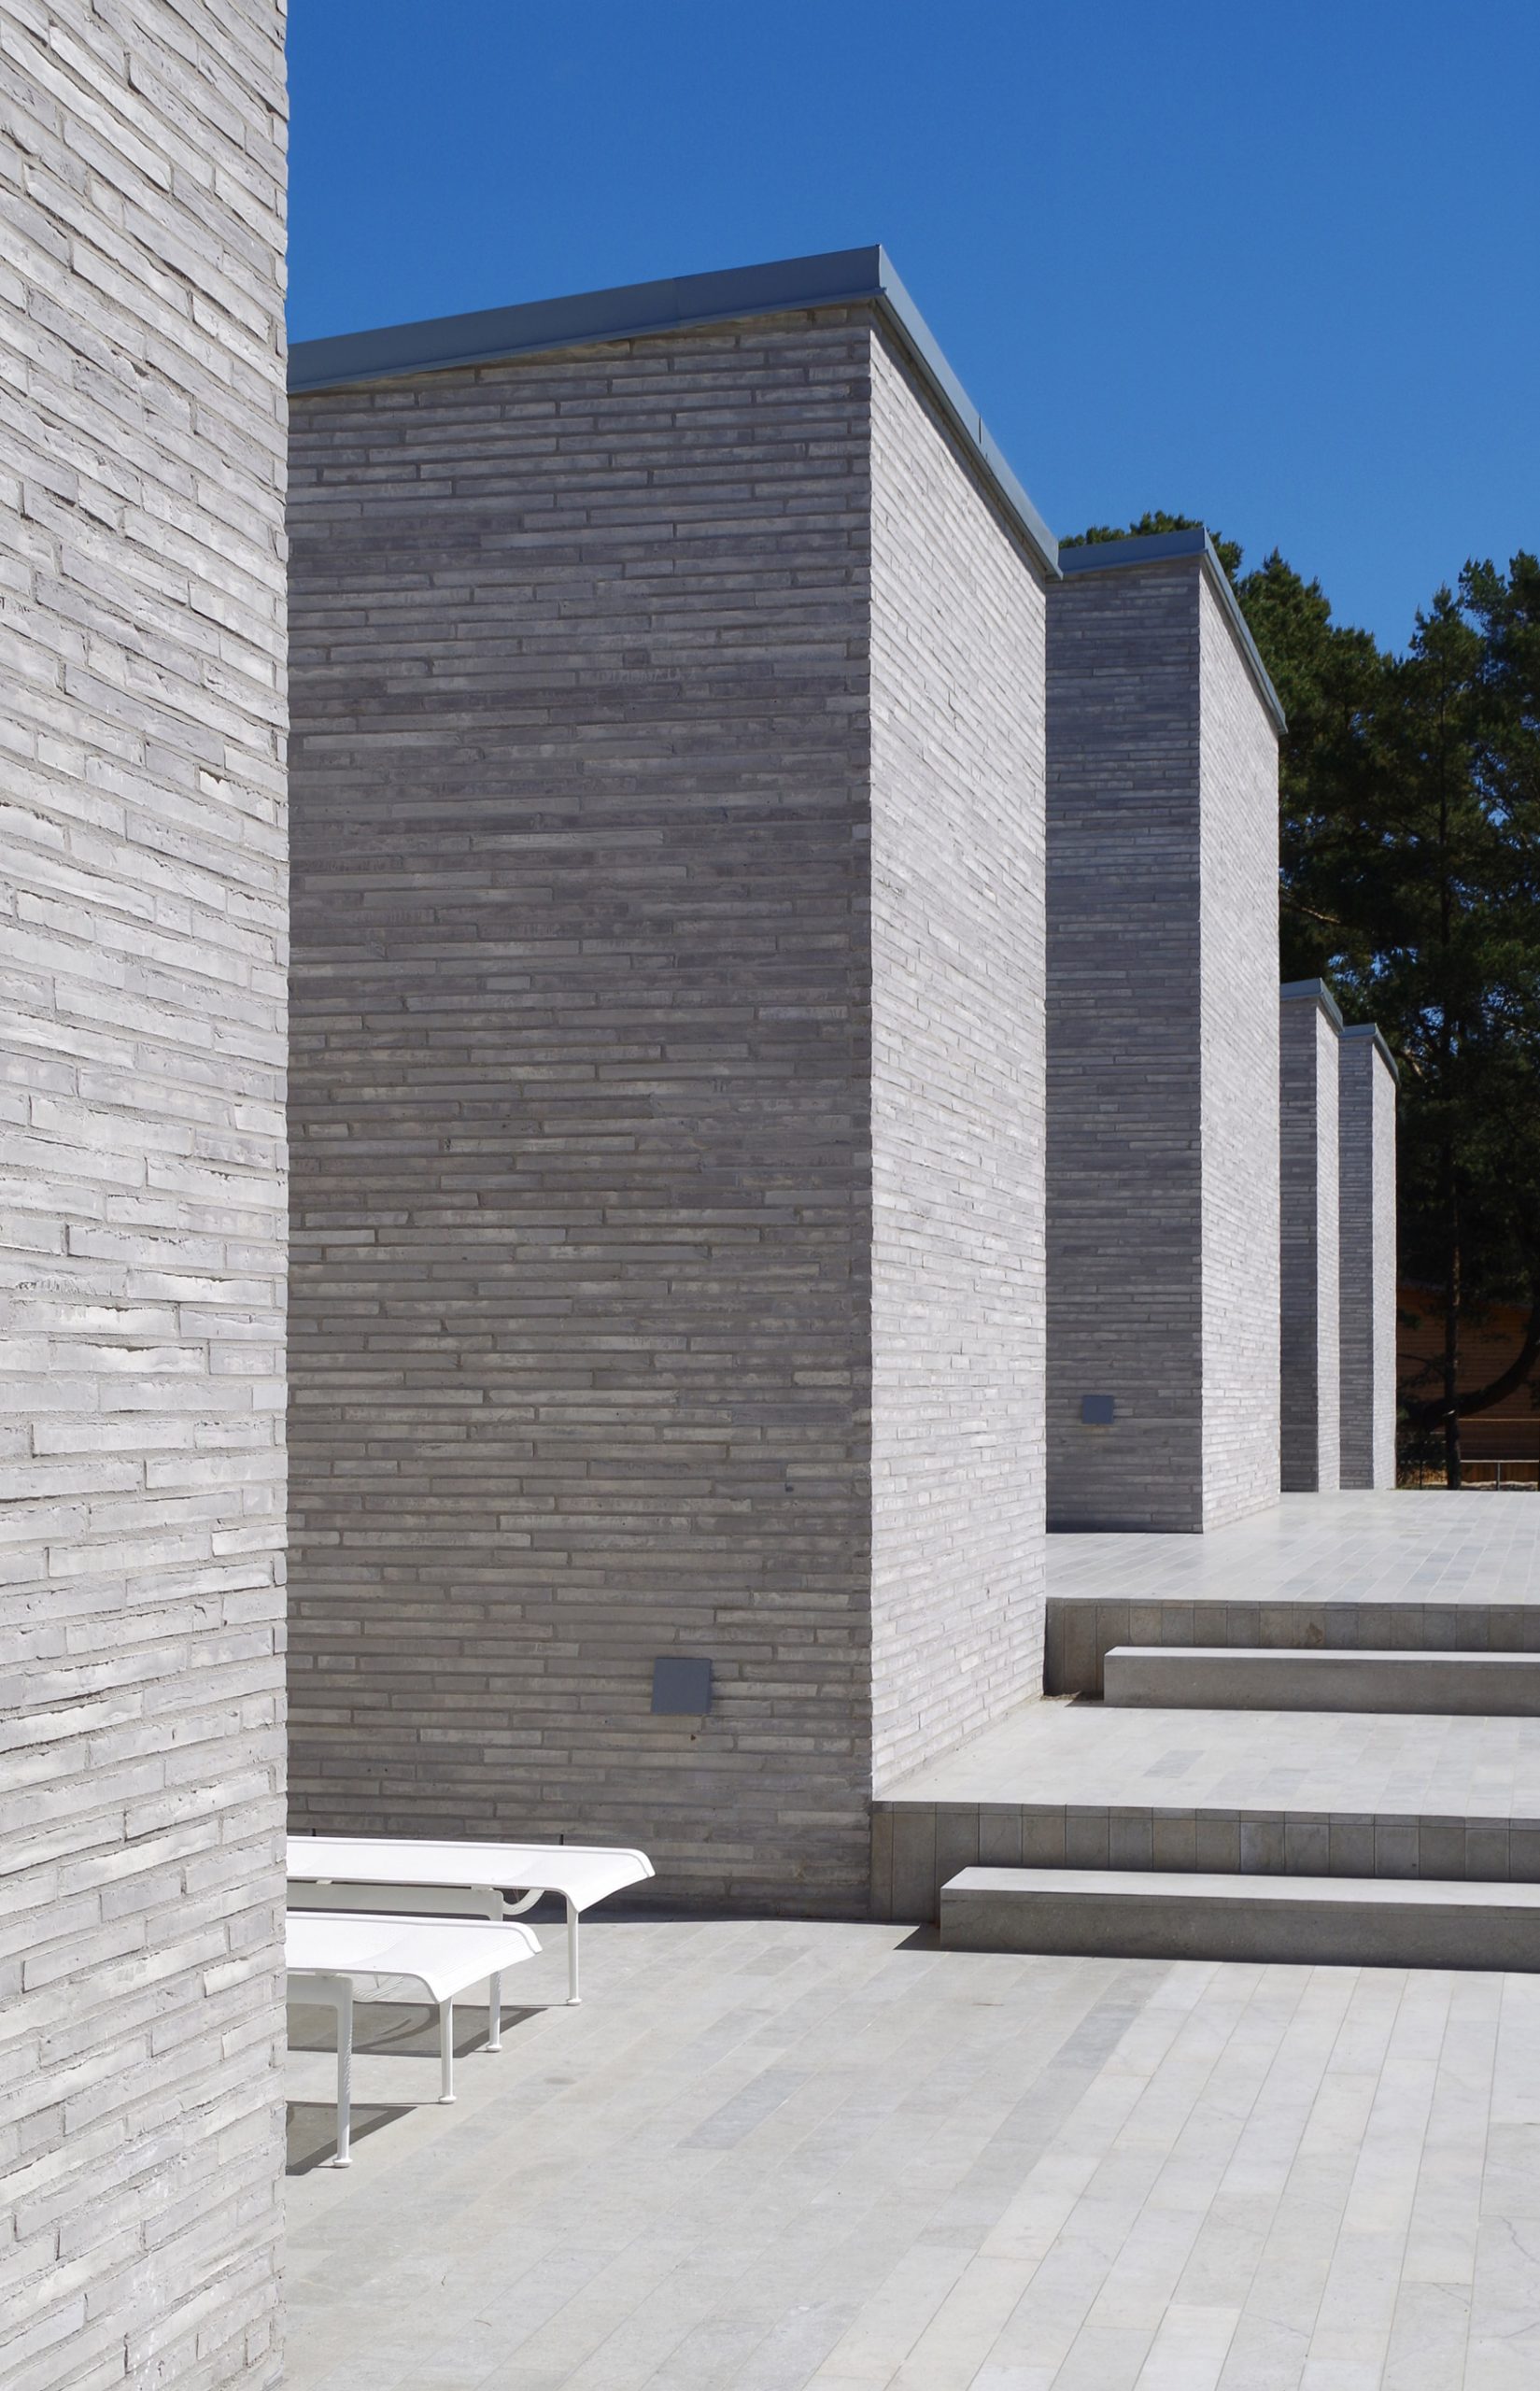 The brick exterior of House of Many Courtyards by Claesson Koivisto Rune